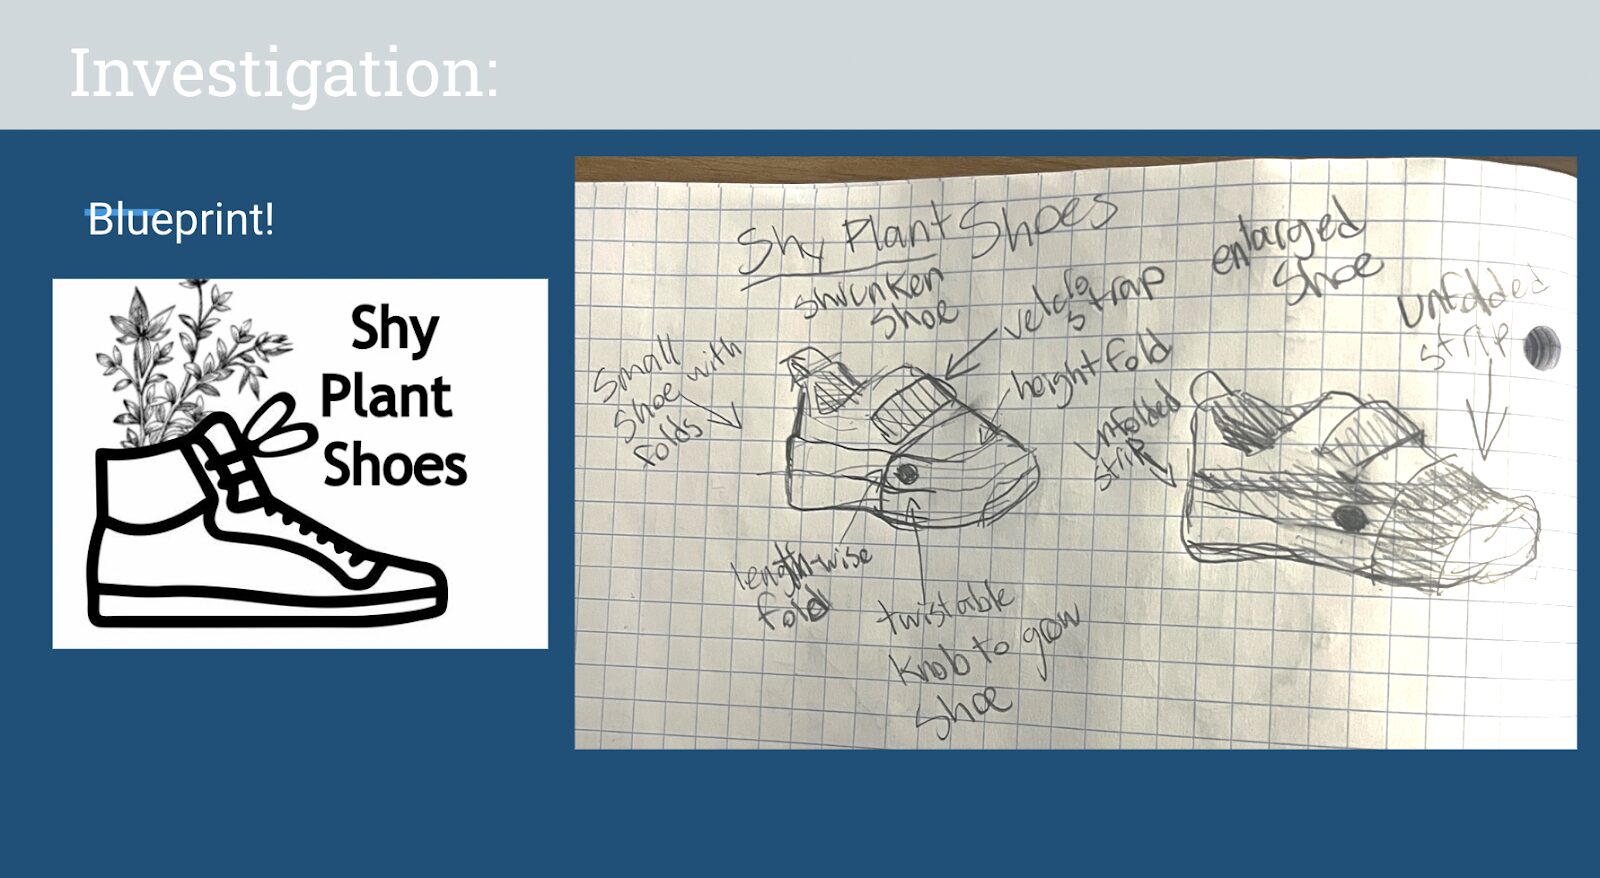 A screenshot of a slide showing the blueprint for Shy Plant Shoes.